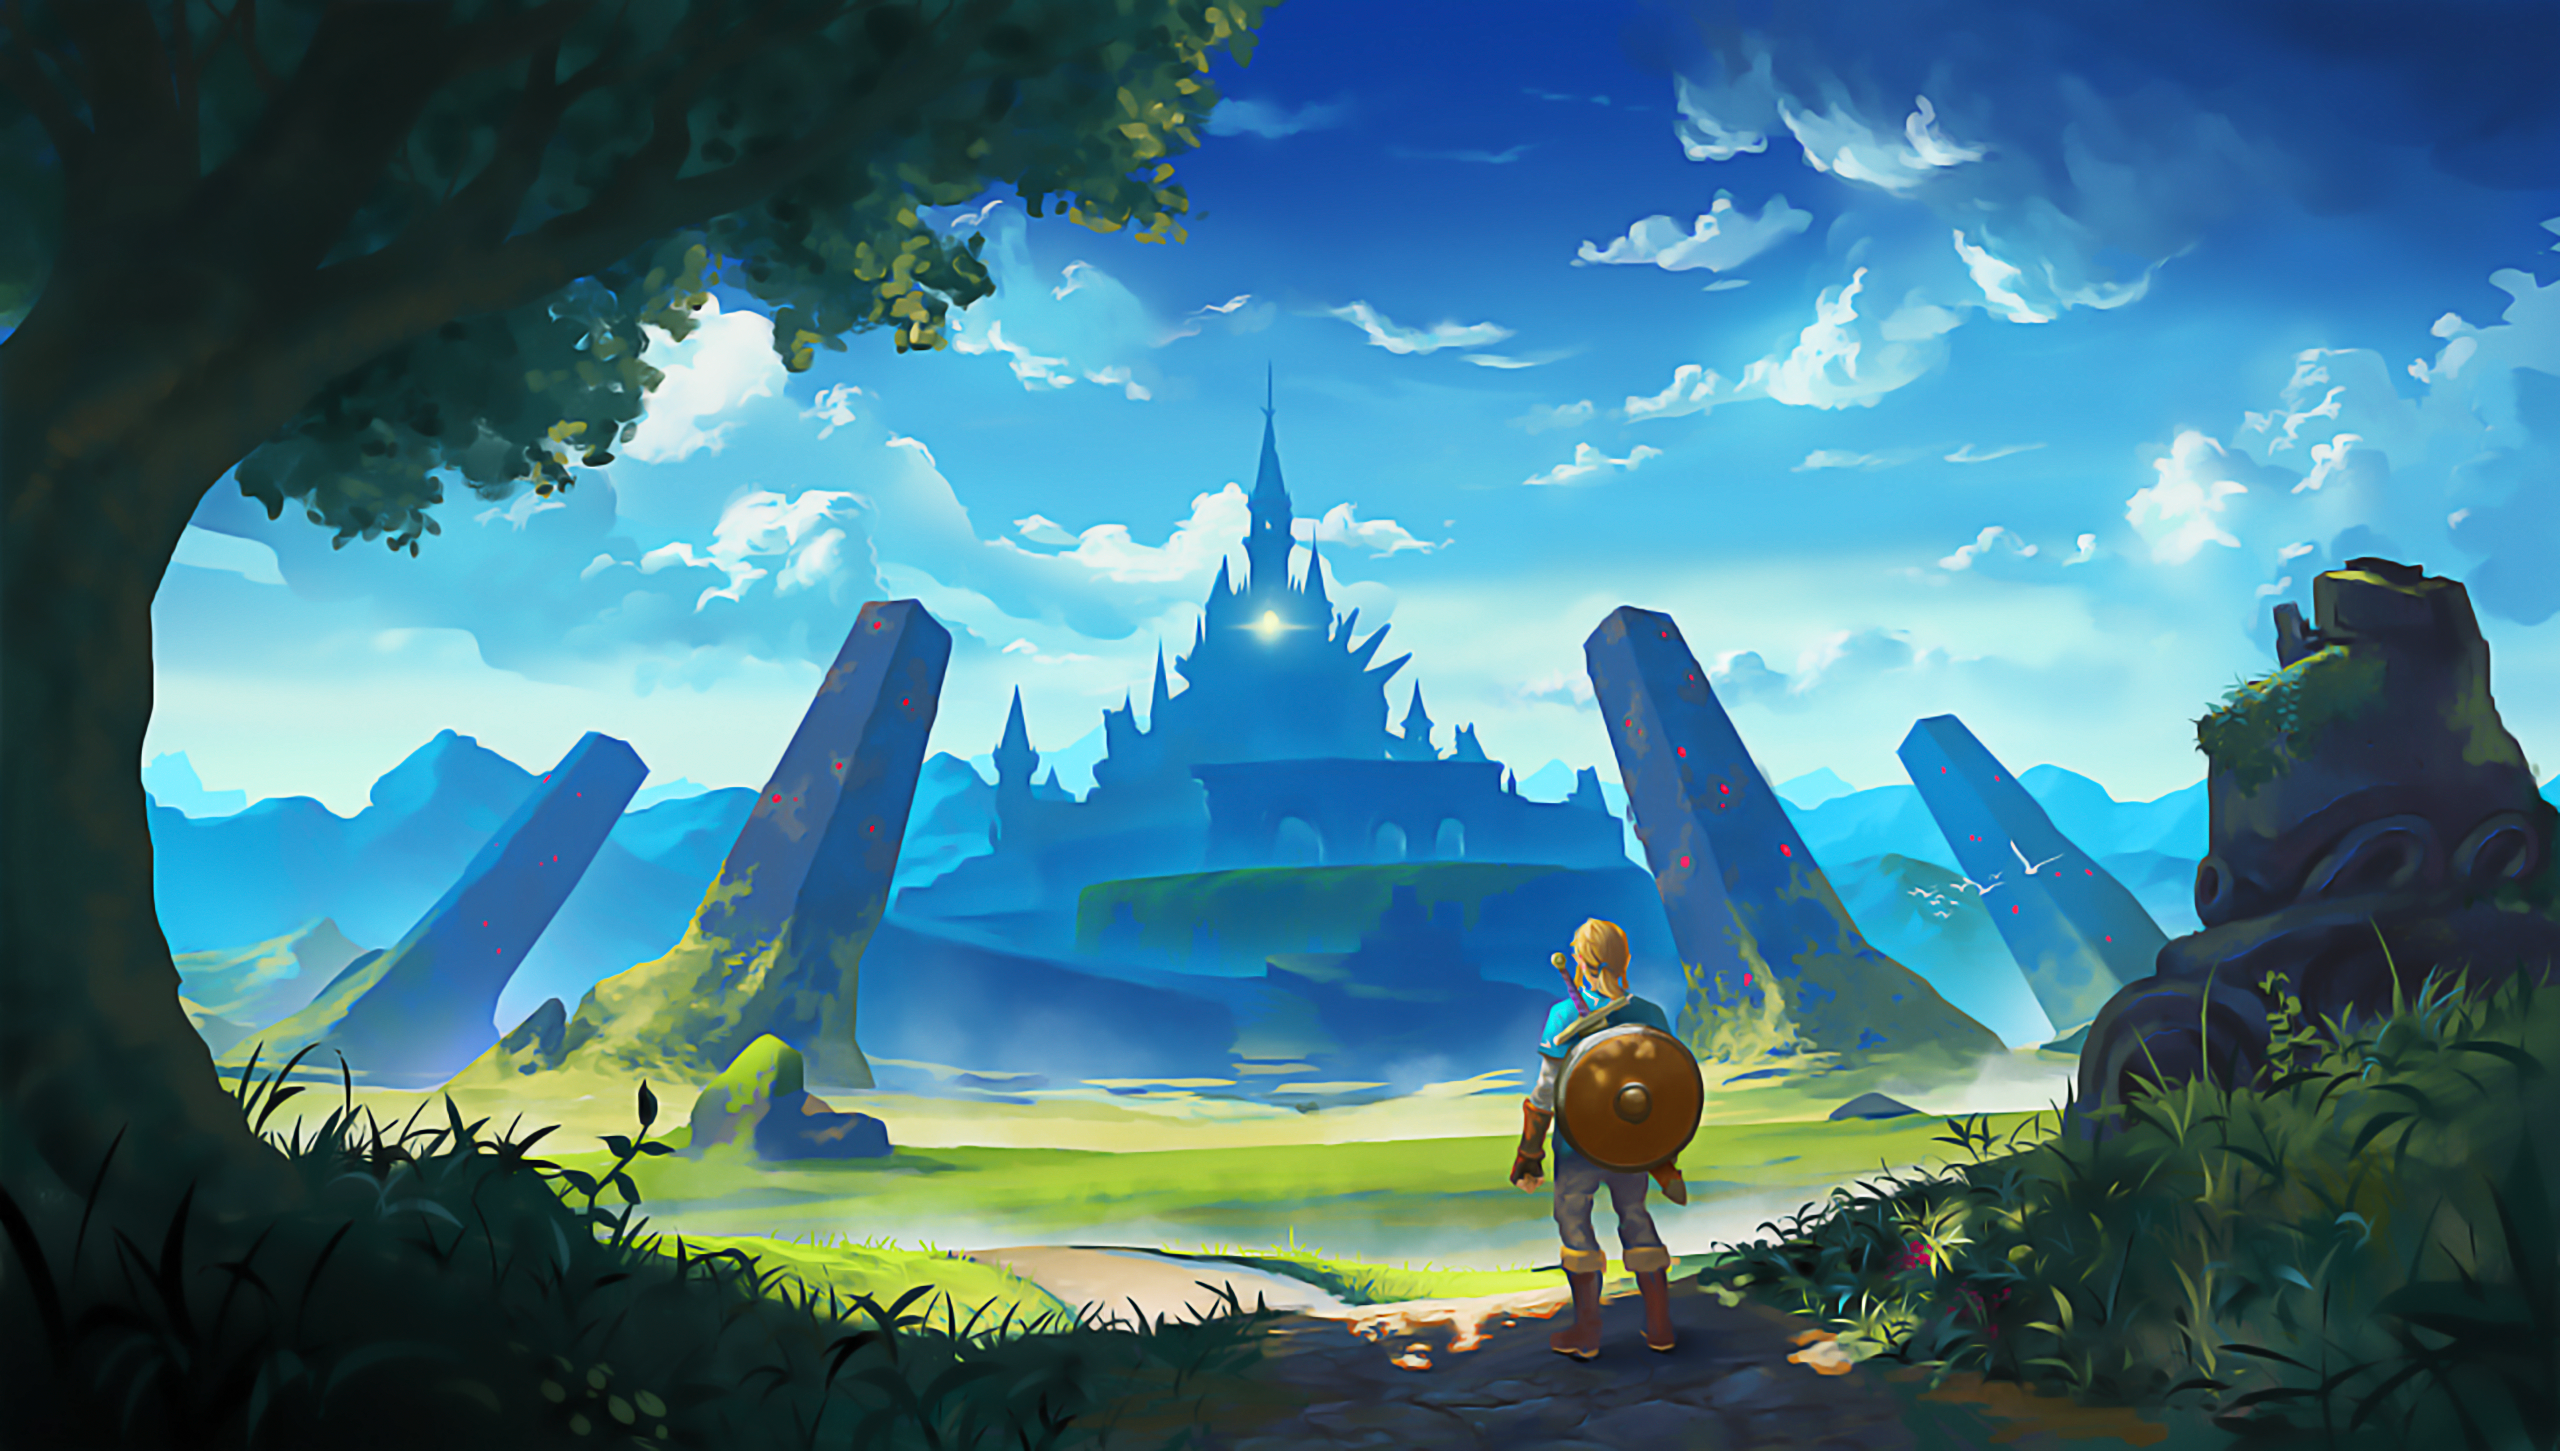 breath of the wild wallpaper,natural landscape,action adventure game,adventure game,cg artwork,games